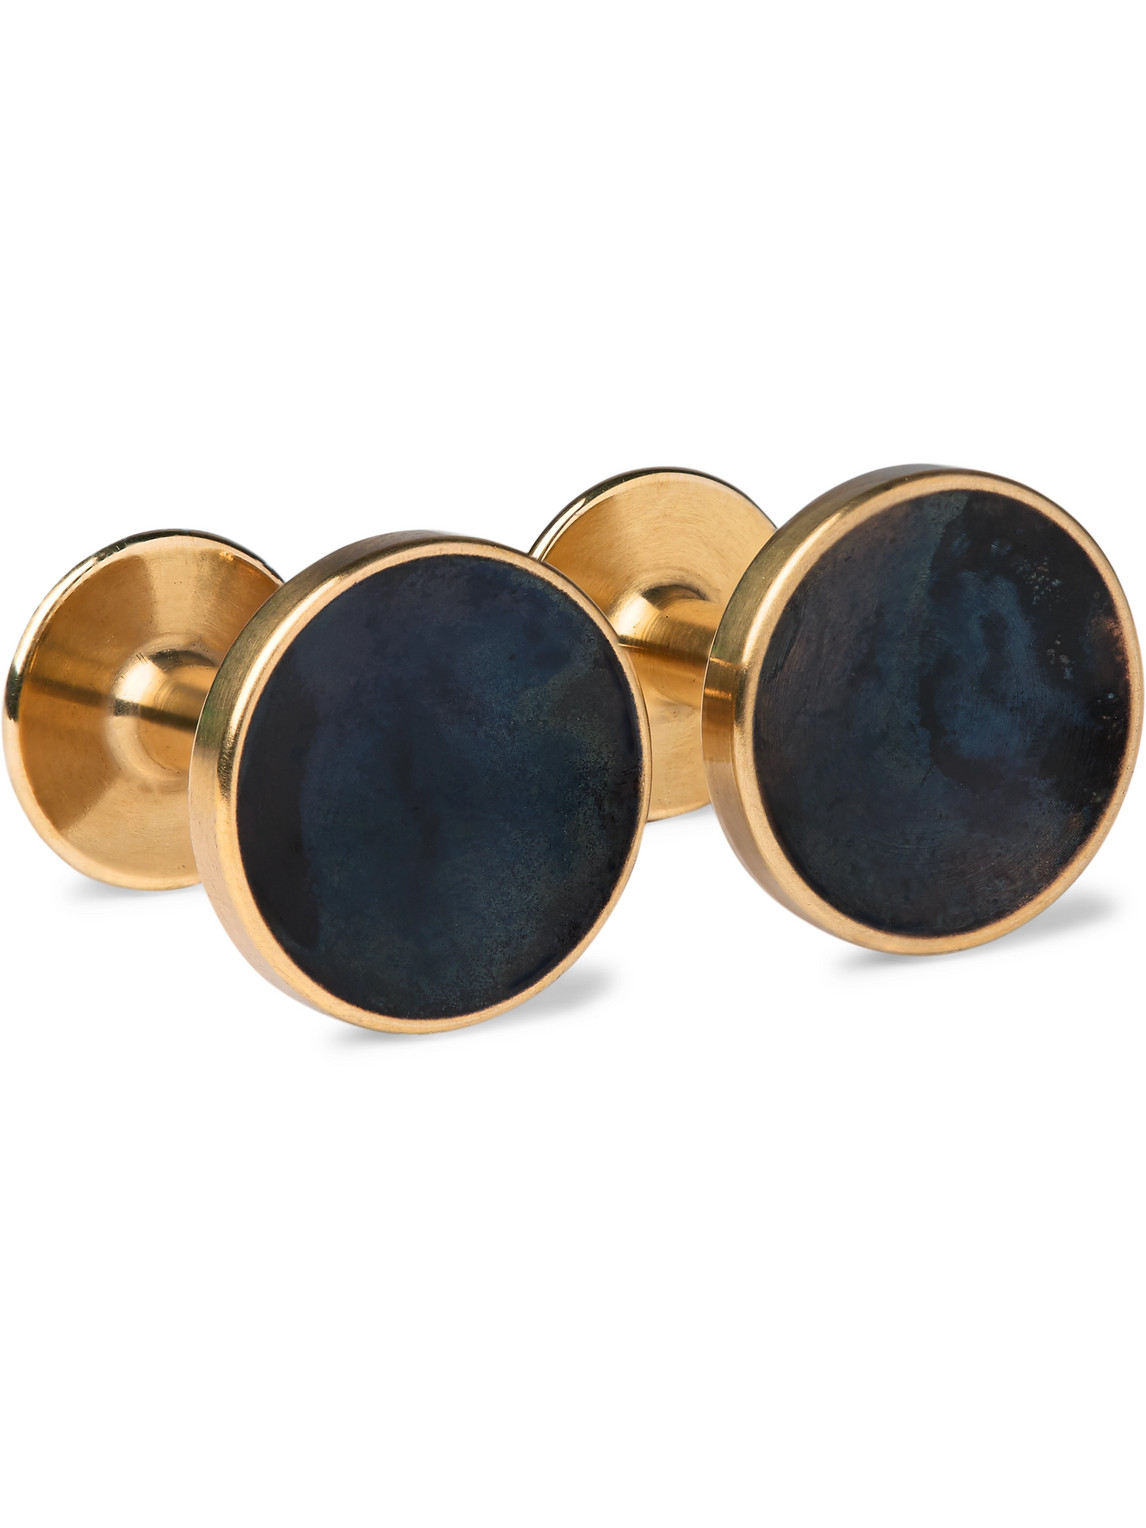 Alice Made This Bayley Quink Patina Brass Cufflinks In Blue